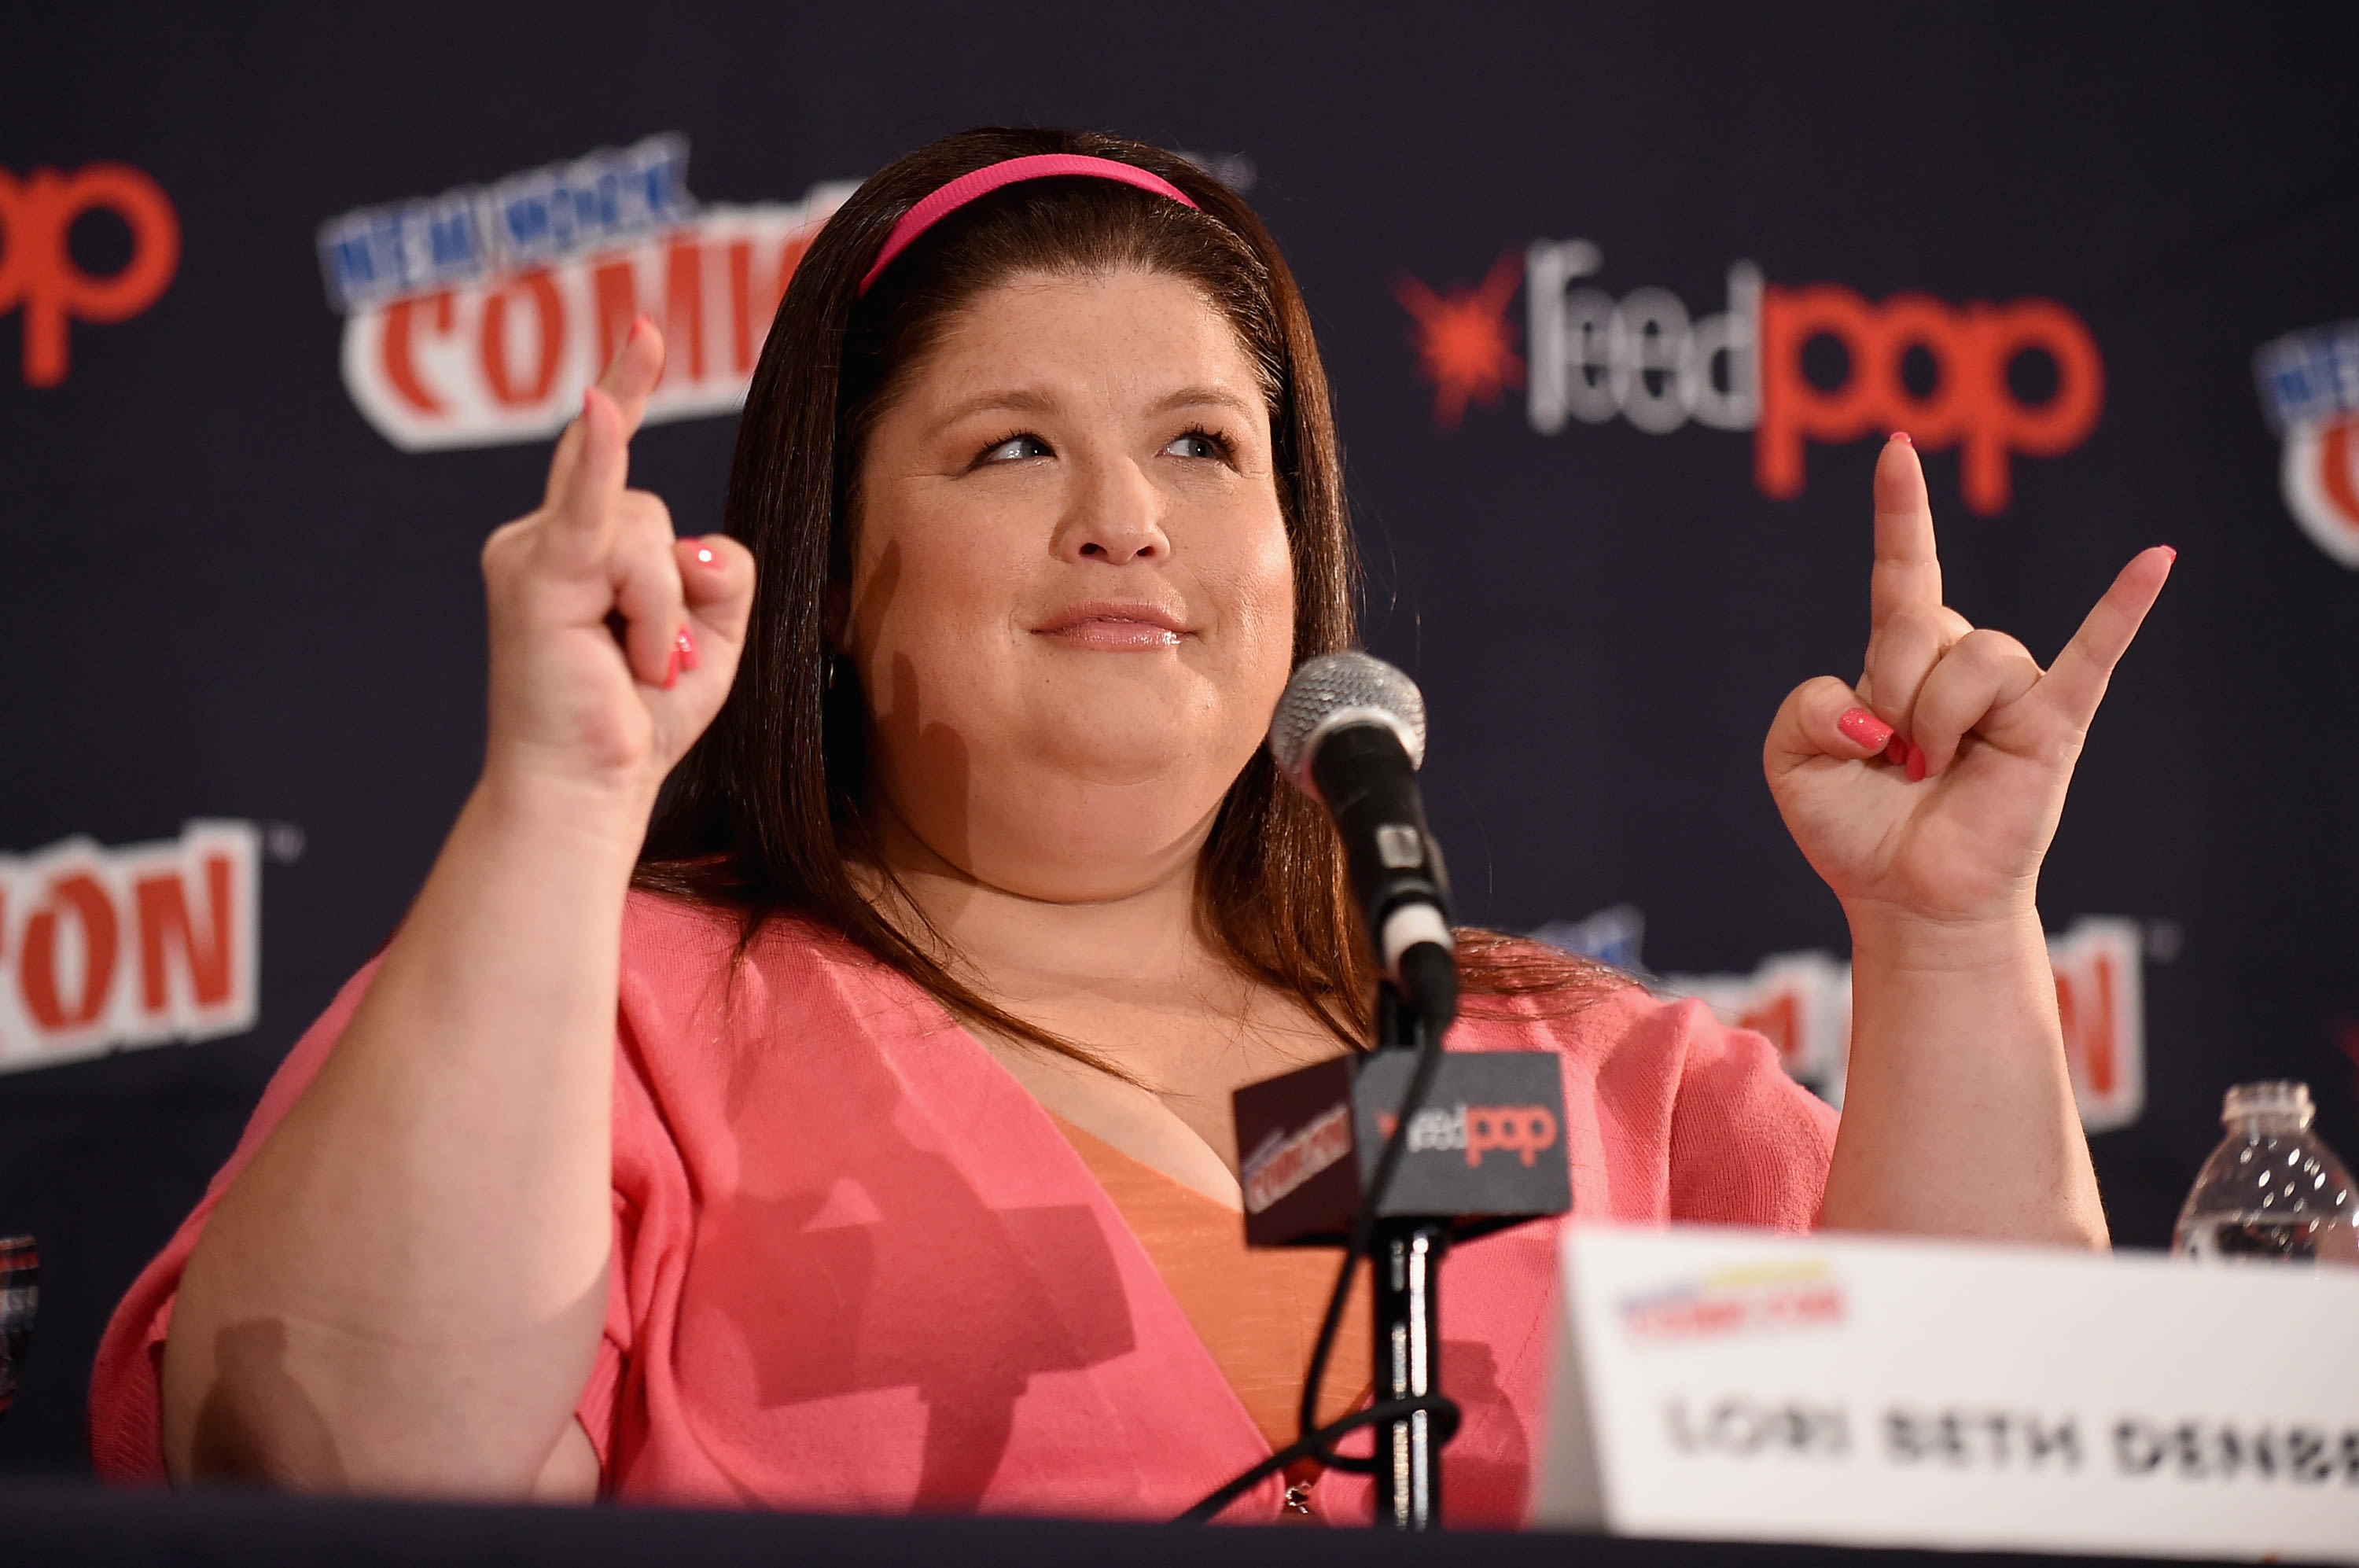 Lori Beth Denberg’s Net Worth Is All That! How Does the Former Nickelodeon Star Make Money?